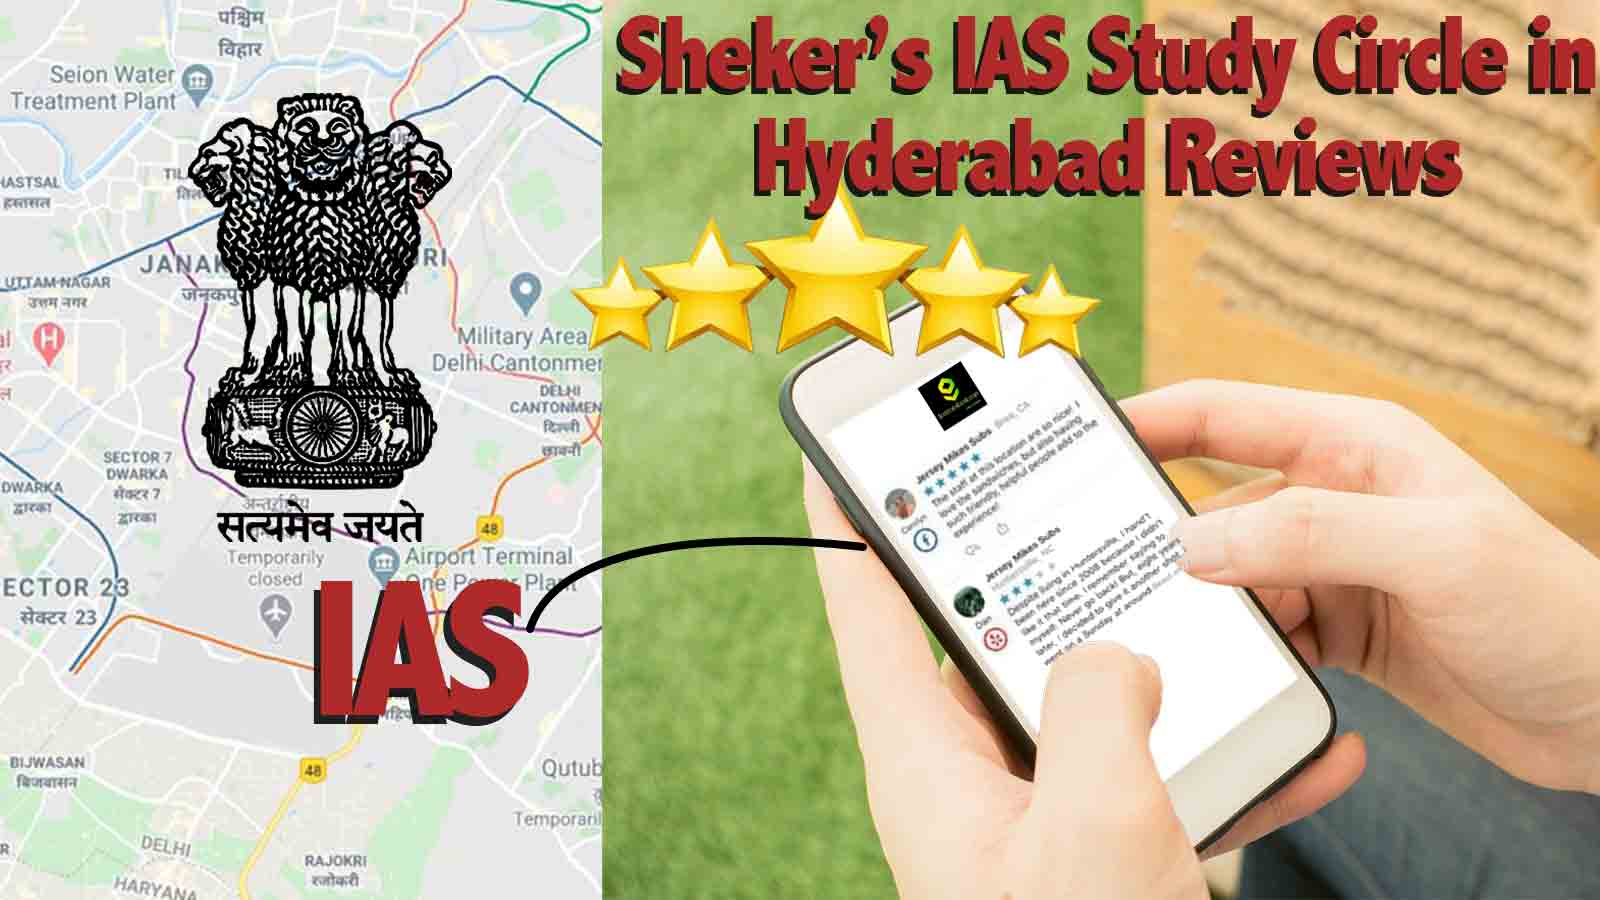 Sheker's IAS Study Circle in Hyderabad Reviews